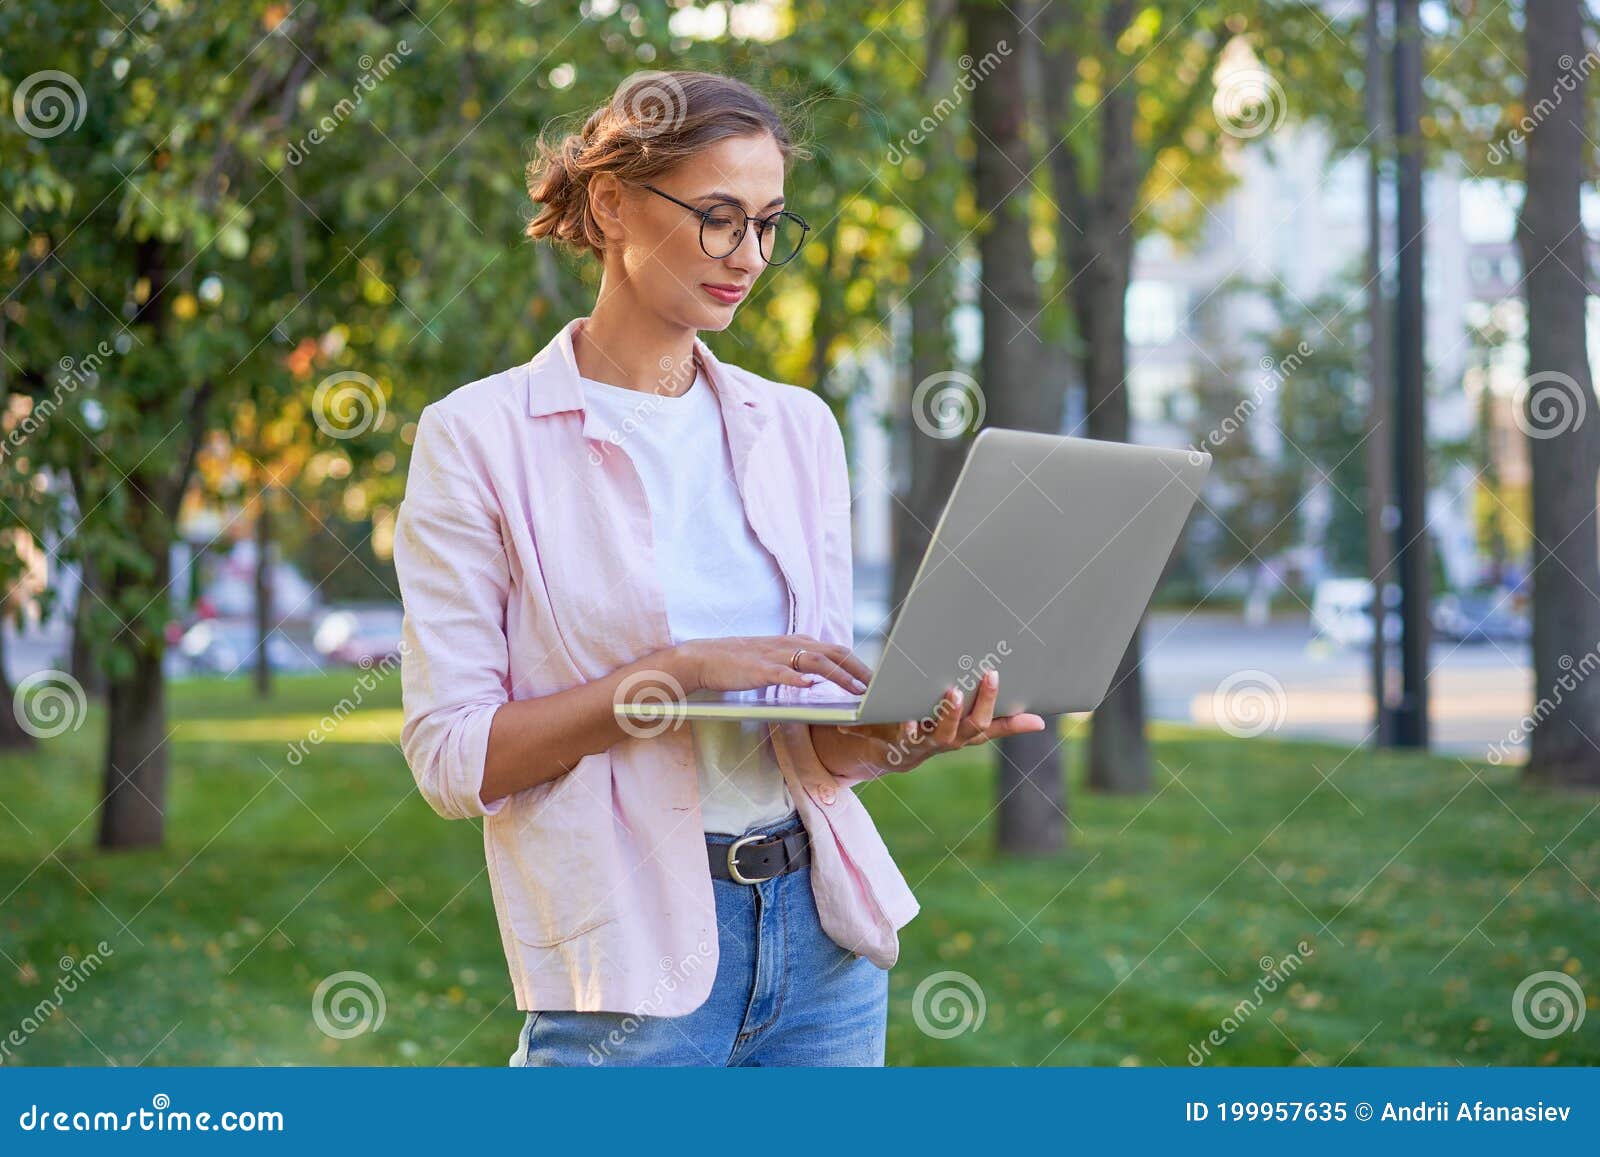 businesswoman standing summer park using laptop business persone working remote. outdoor